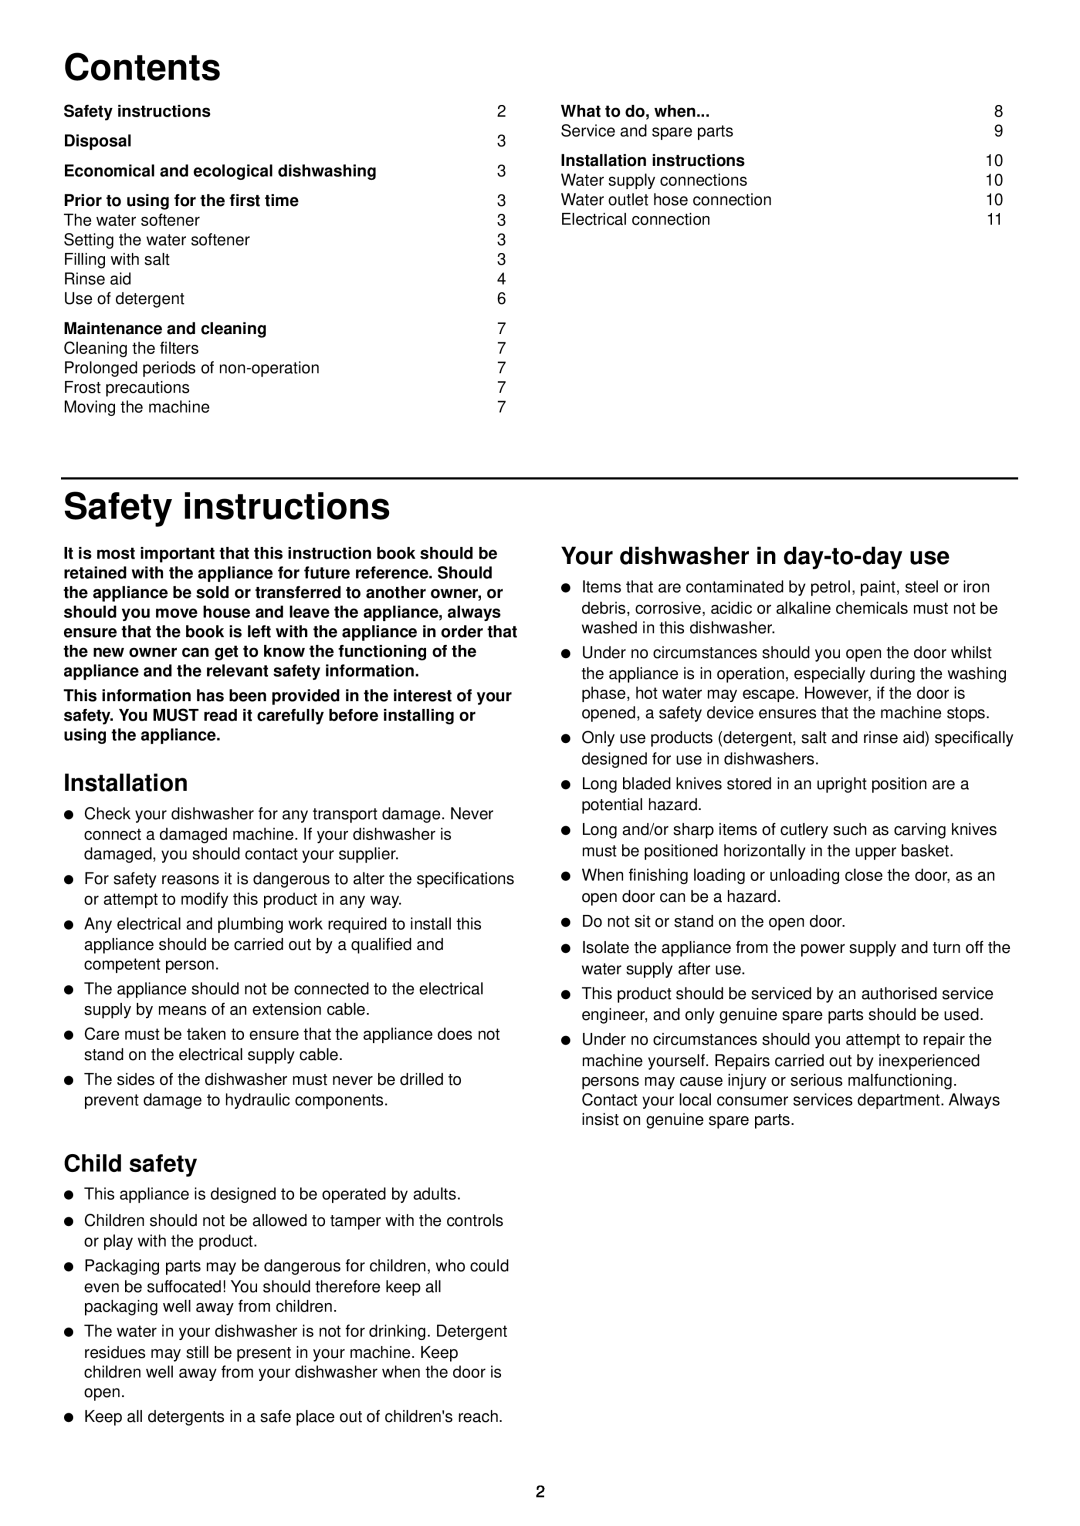 Zanussi DA 6141 D manual Contents, Safety instructions, Installation, Your dishwasher in day-to-day use, Child safety 